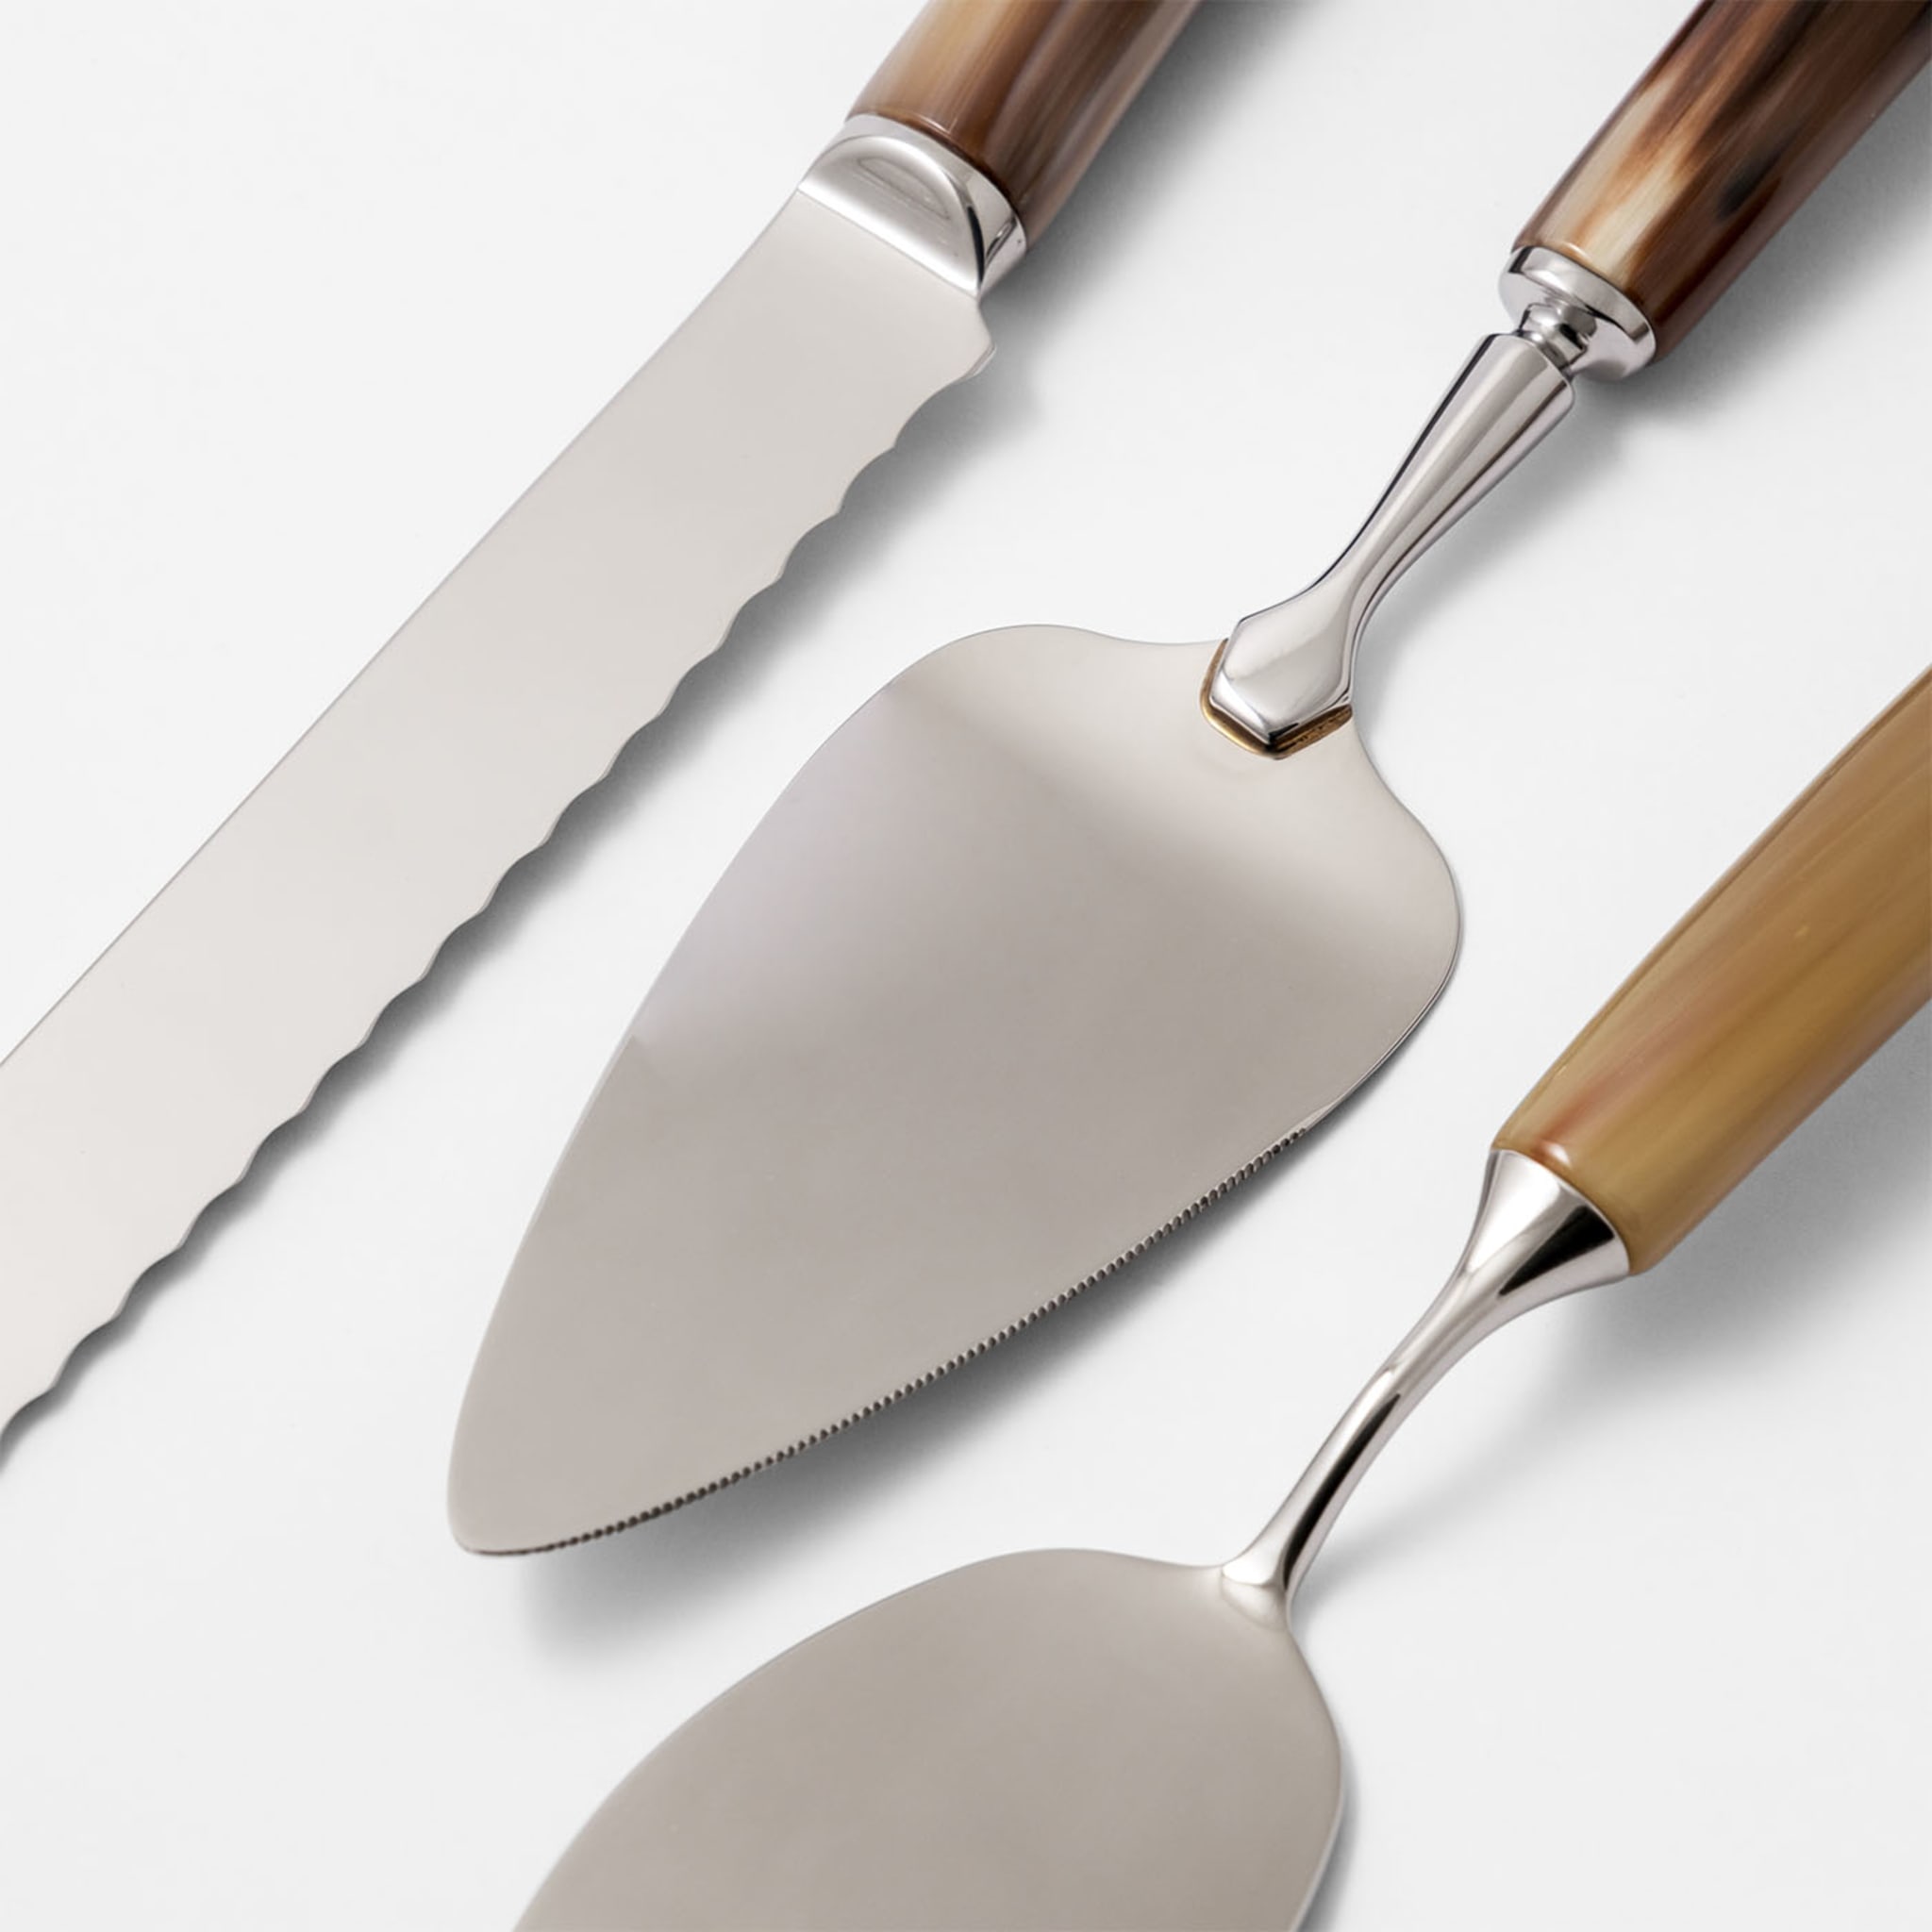 Cake Cutlery Set in Natural Horn - Alternative view 1